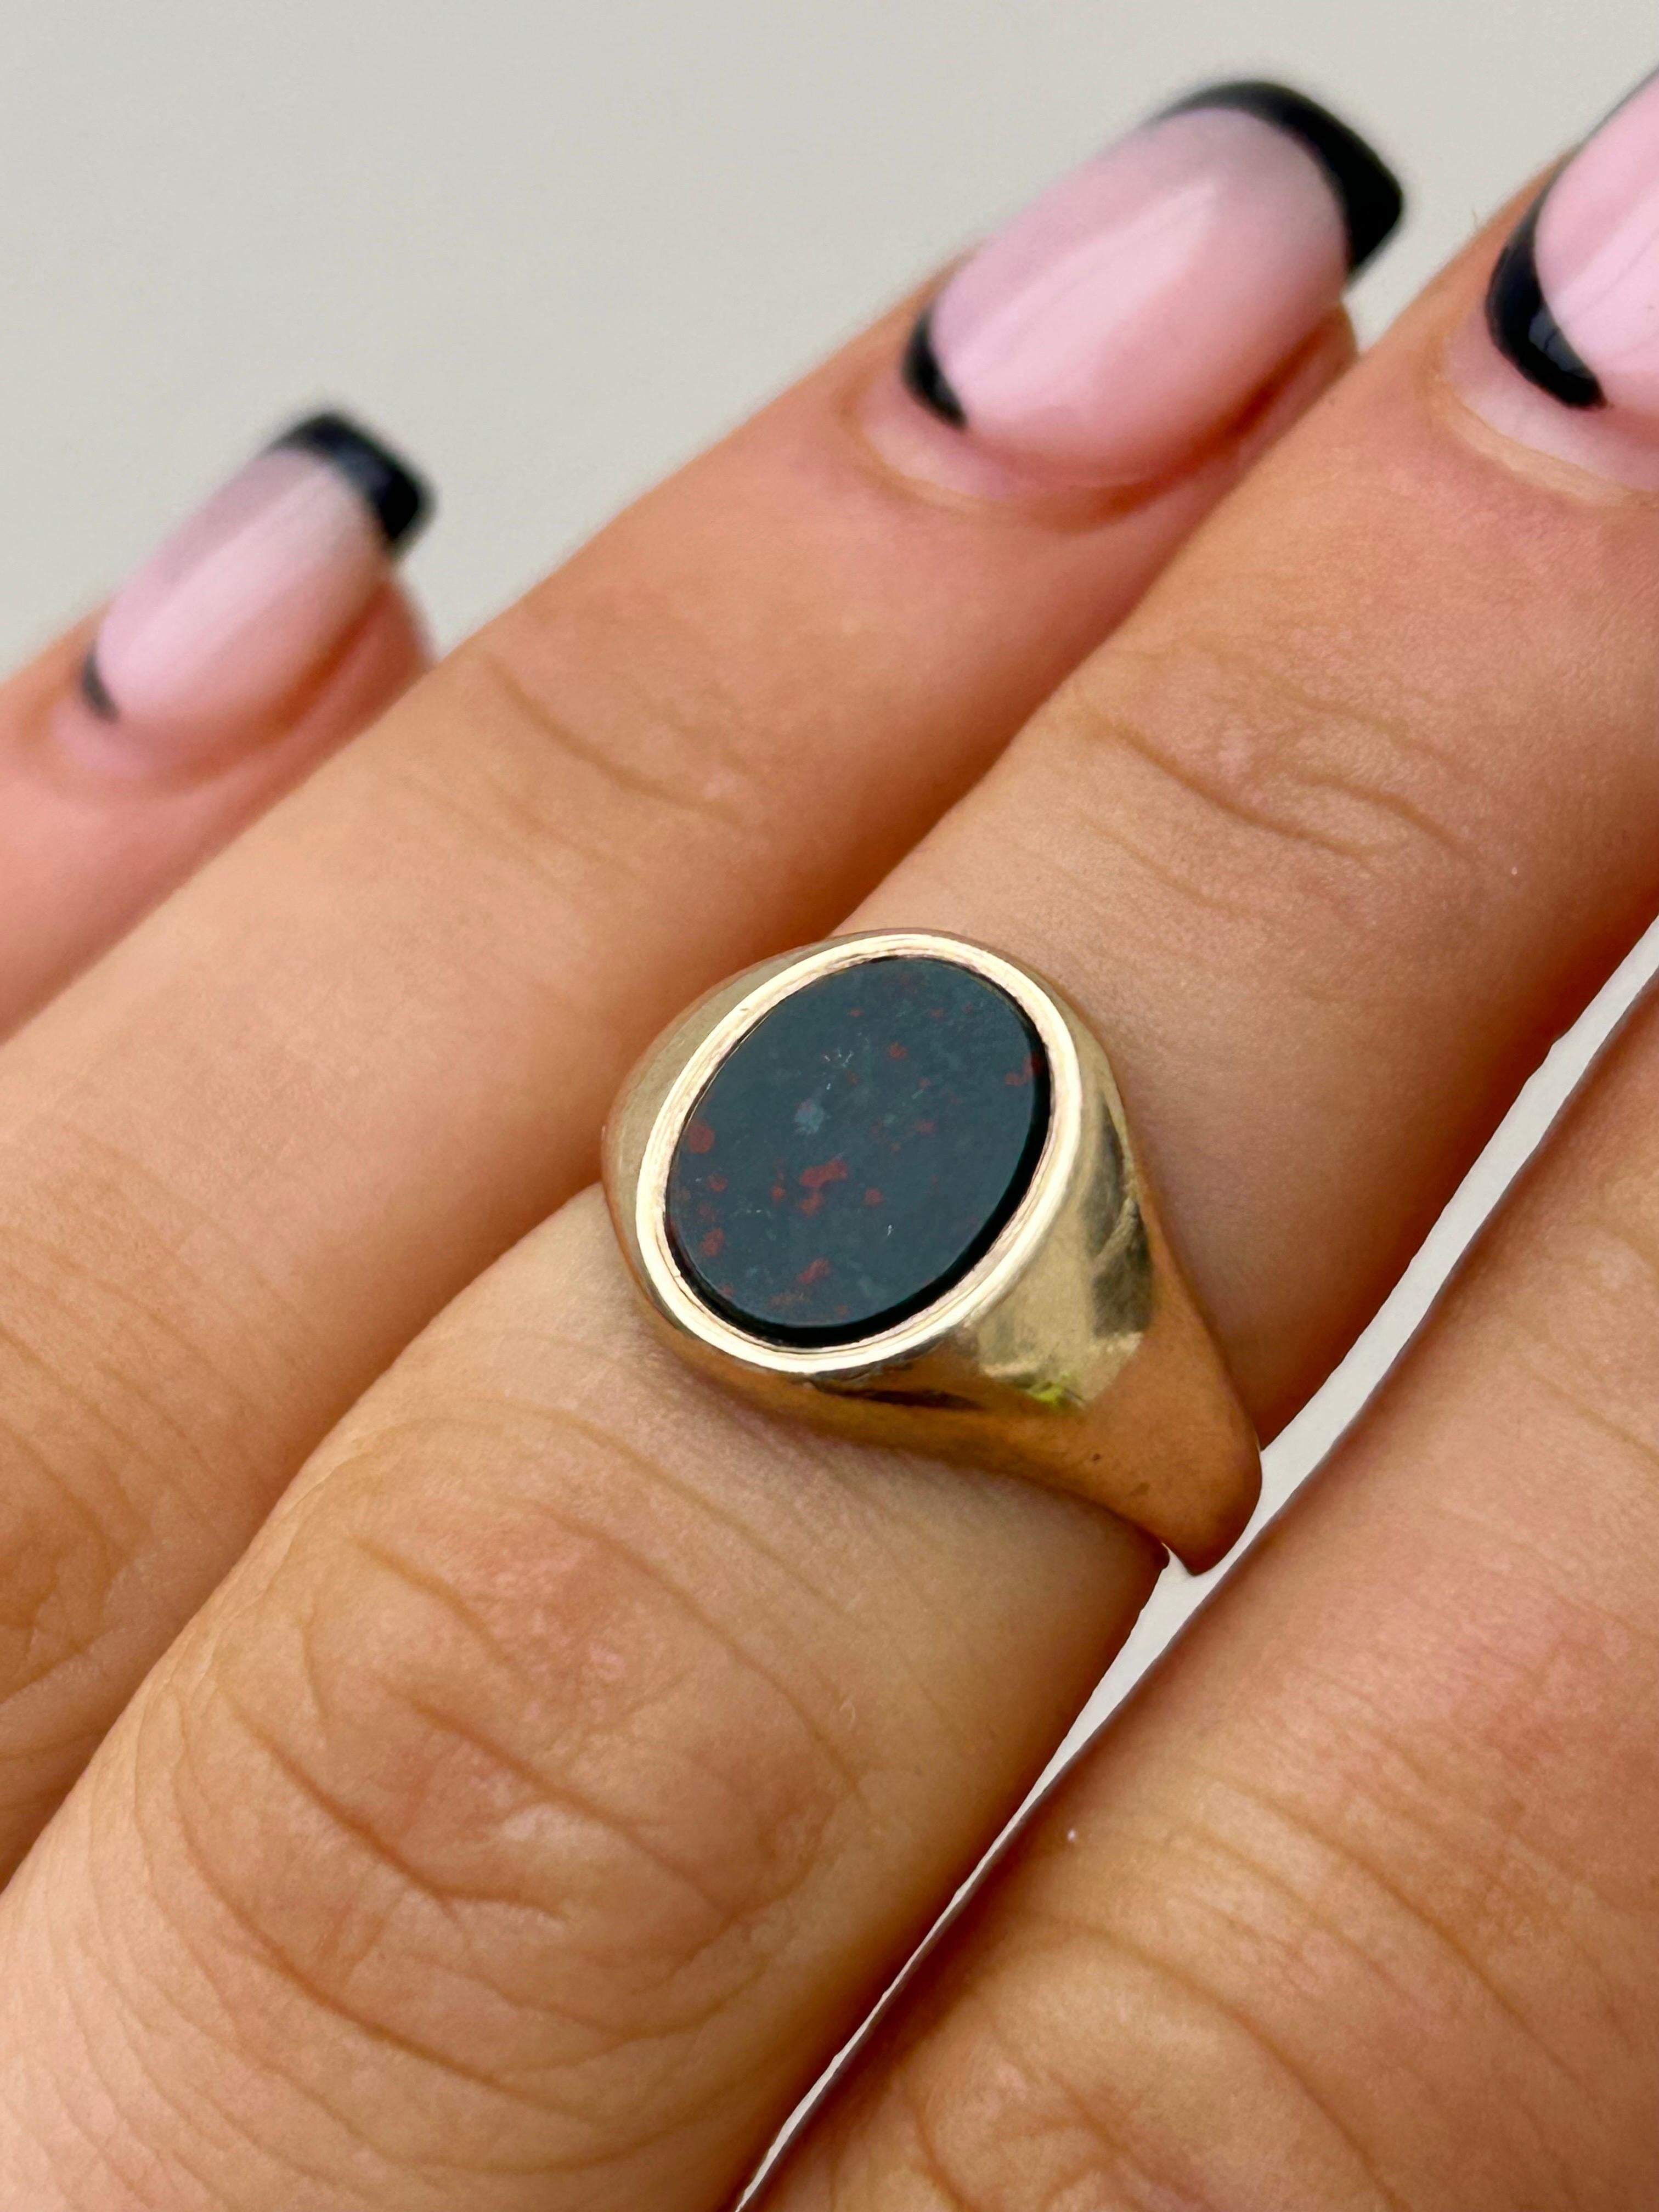 Vintage 9ct Yellow Gold Bloodstone Signet Ring 

charming unisex signet ring 

Measurements: Weight 3.17g, ring size UK K / US 51/2, head of ring 11mm x 8mm, height off finger 2mm 

Materials:  9ct yellow gold & bloodstone

Hallmarks: hallmarked